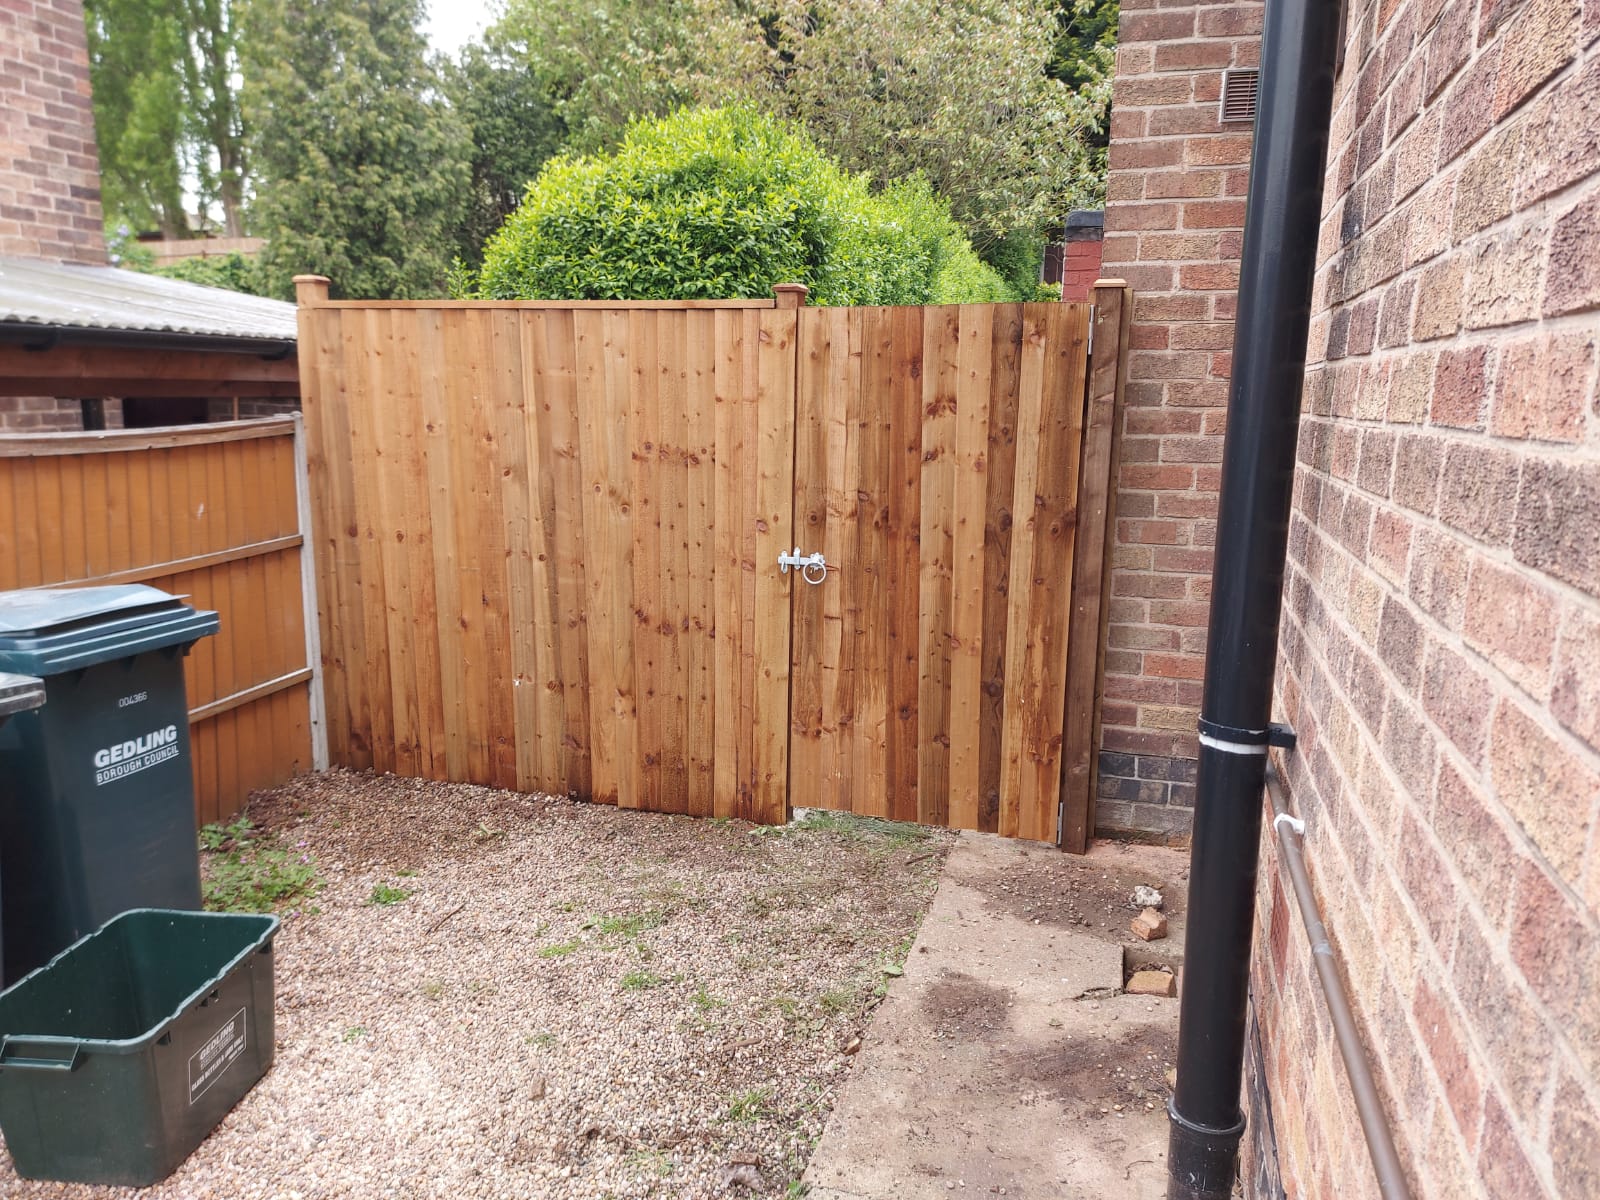 Fencing York wide wooden garden gate with fencing from outside